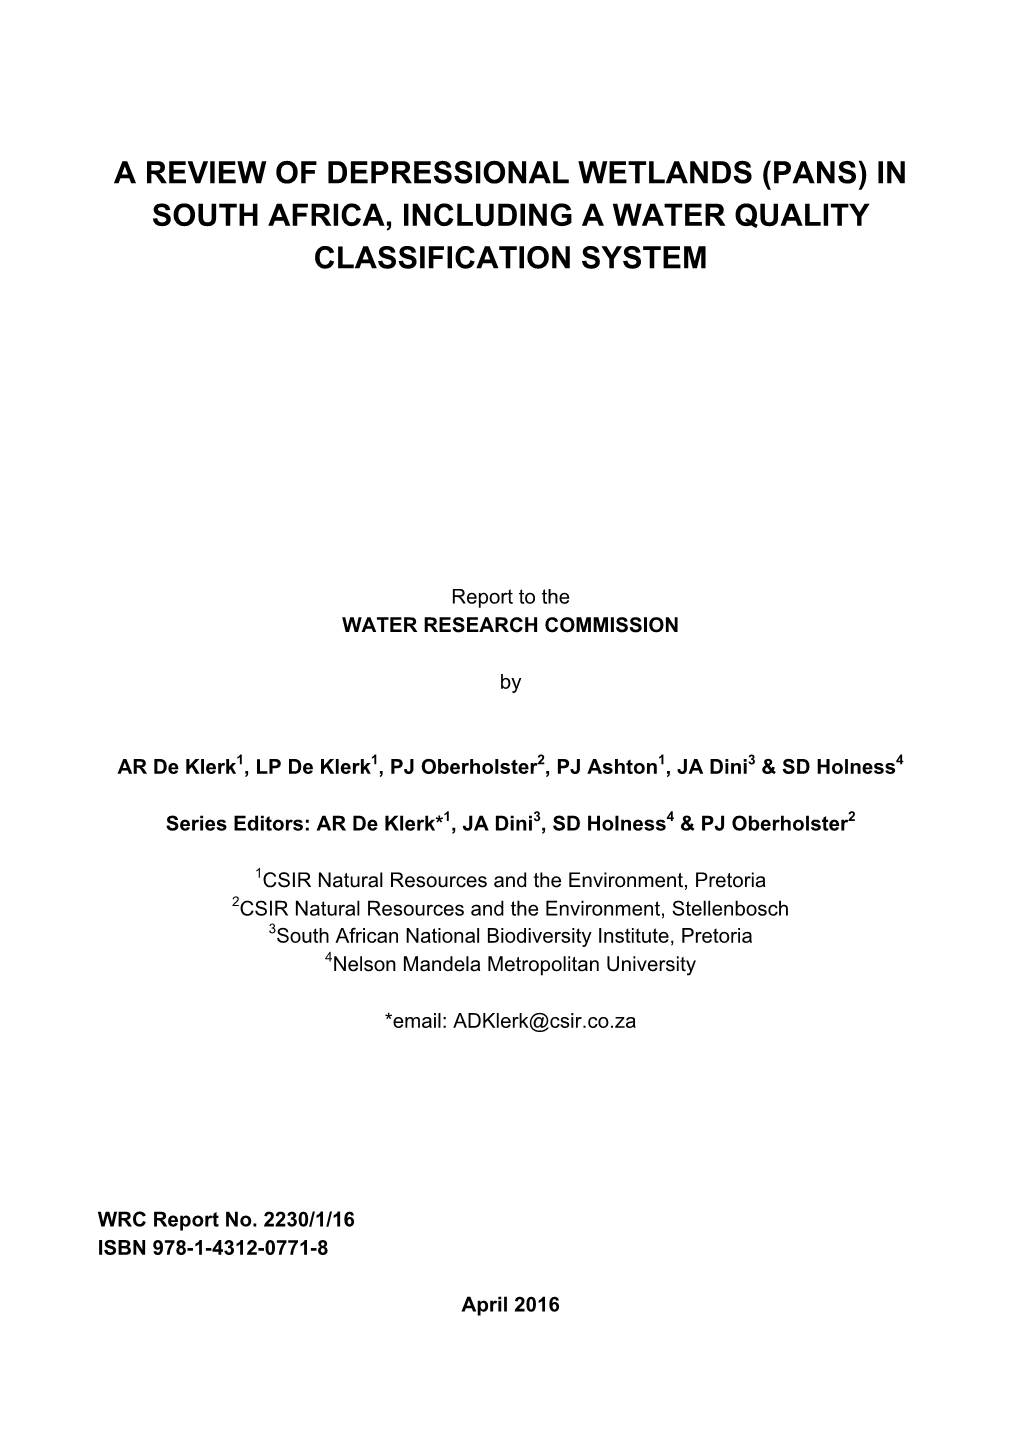 A Review of Depressional Wetlands (Pans) in South Africa, Including a Water Quality Classification System